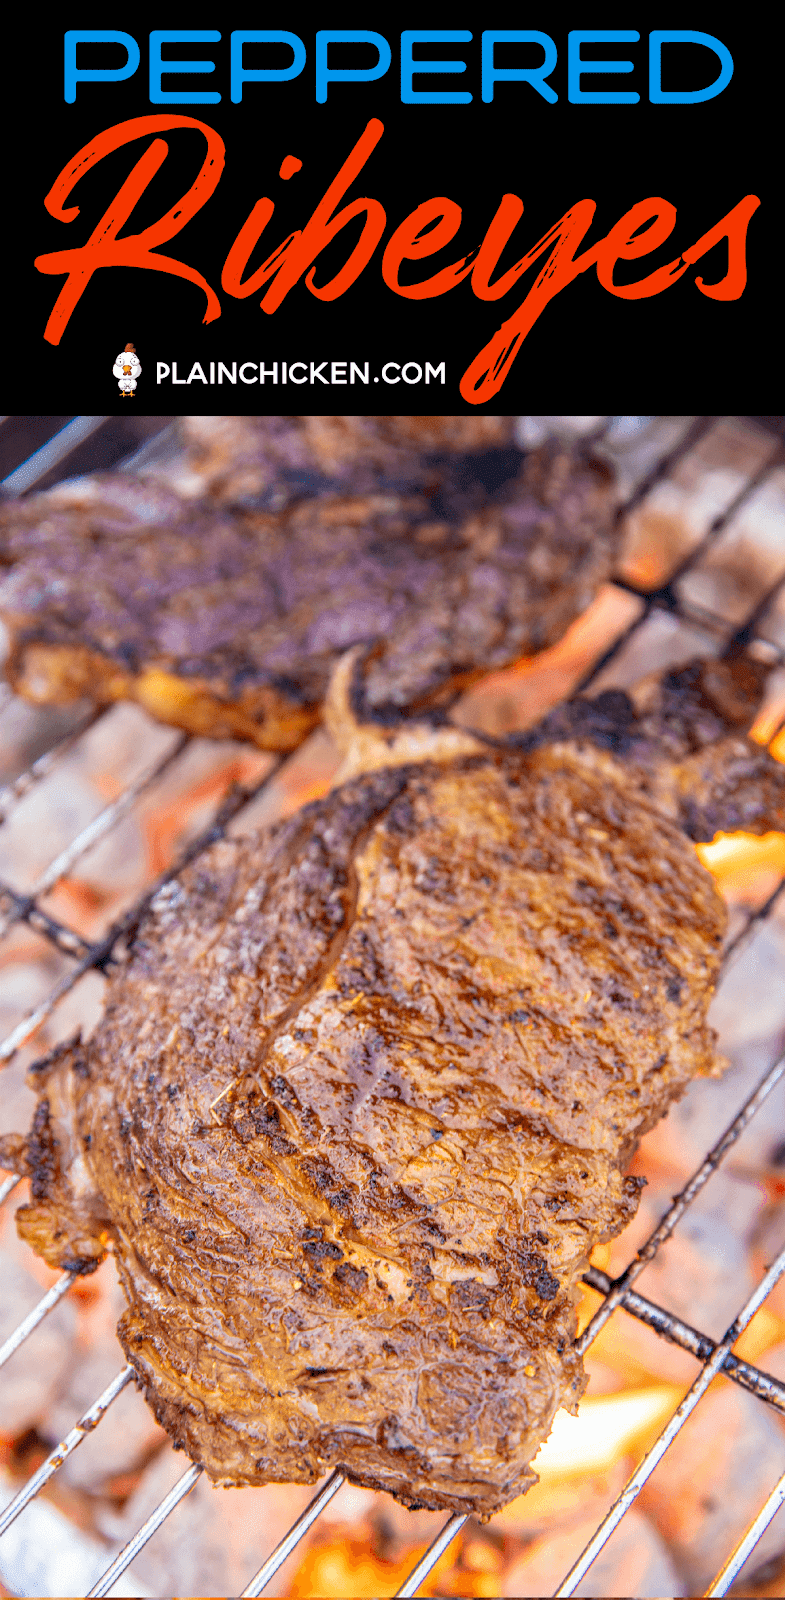 steaks cooking on the grill